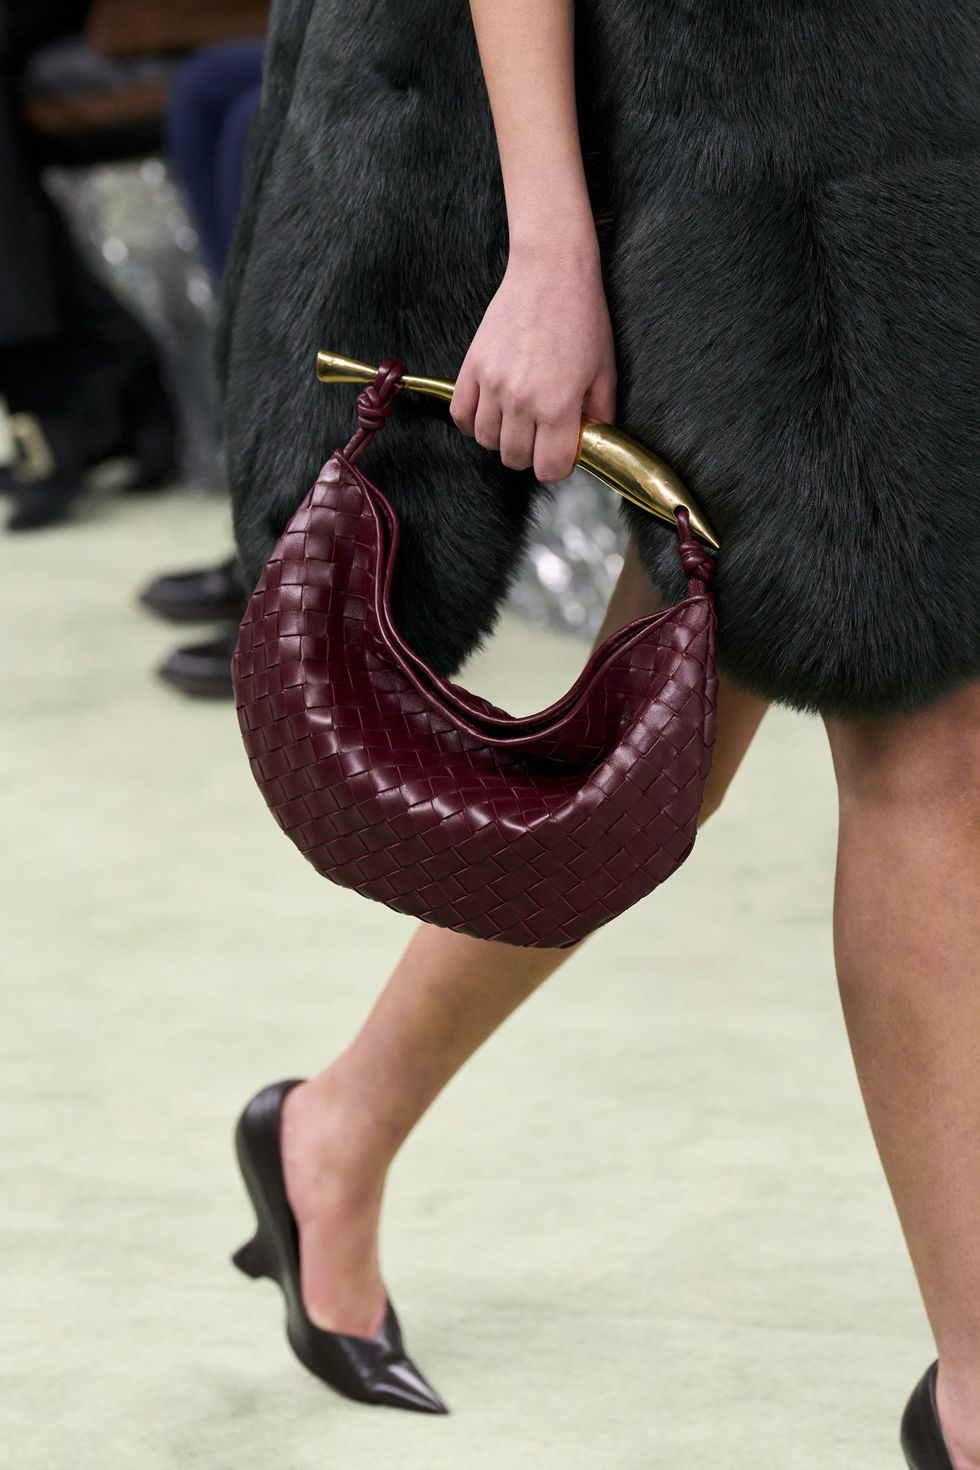 Classic Louis Vuitton Handbags to Invest In in 2021—From the Speedy to the  Alma